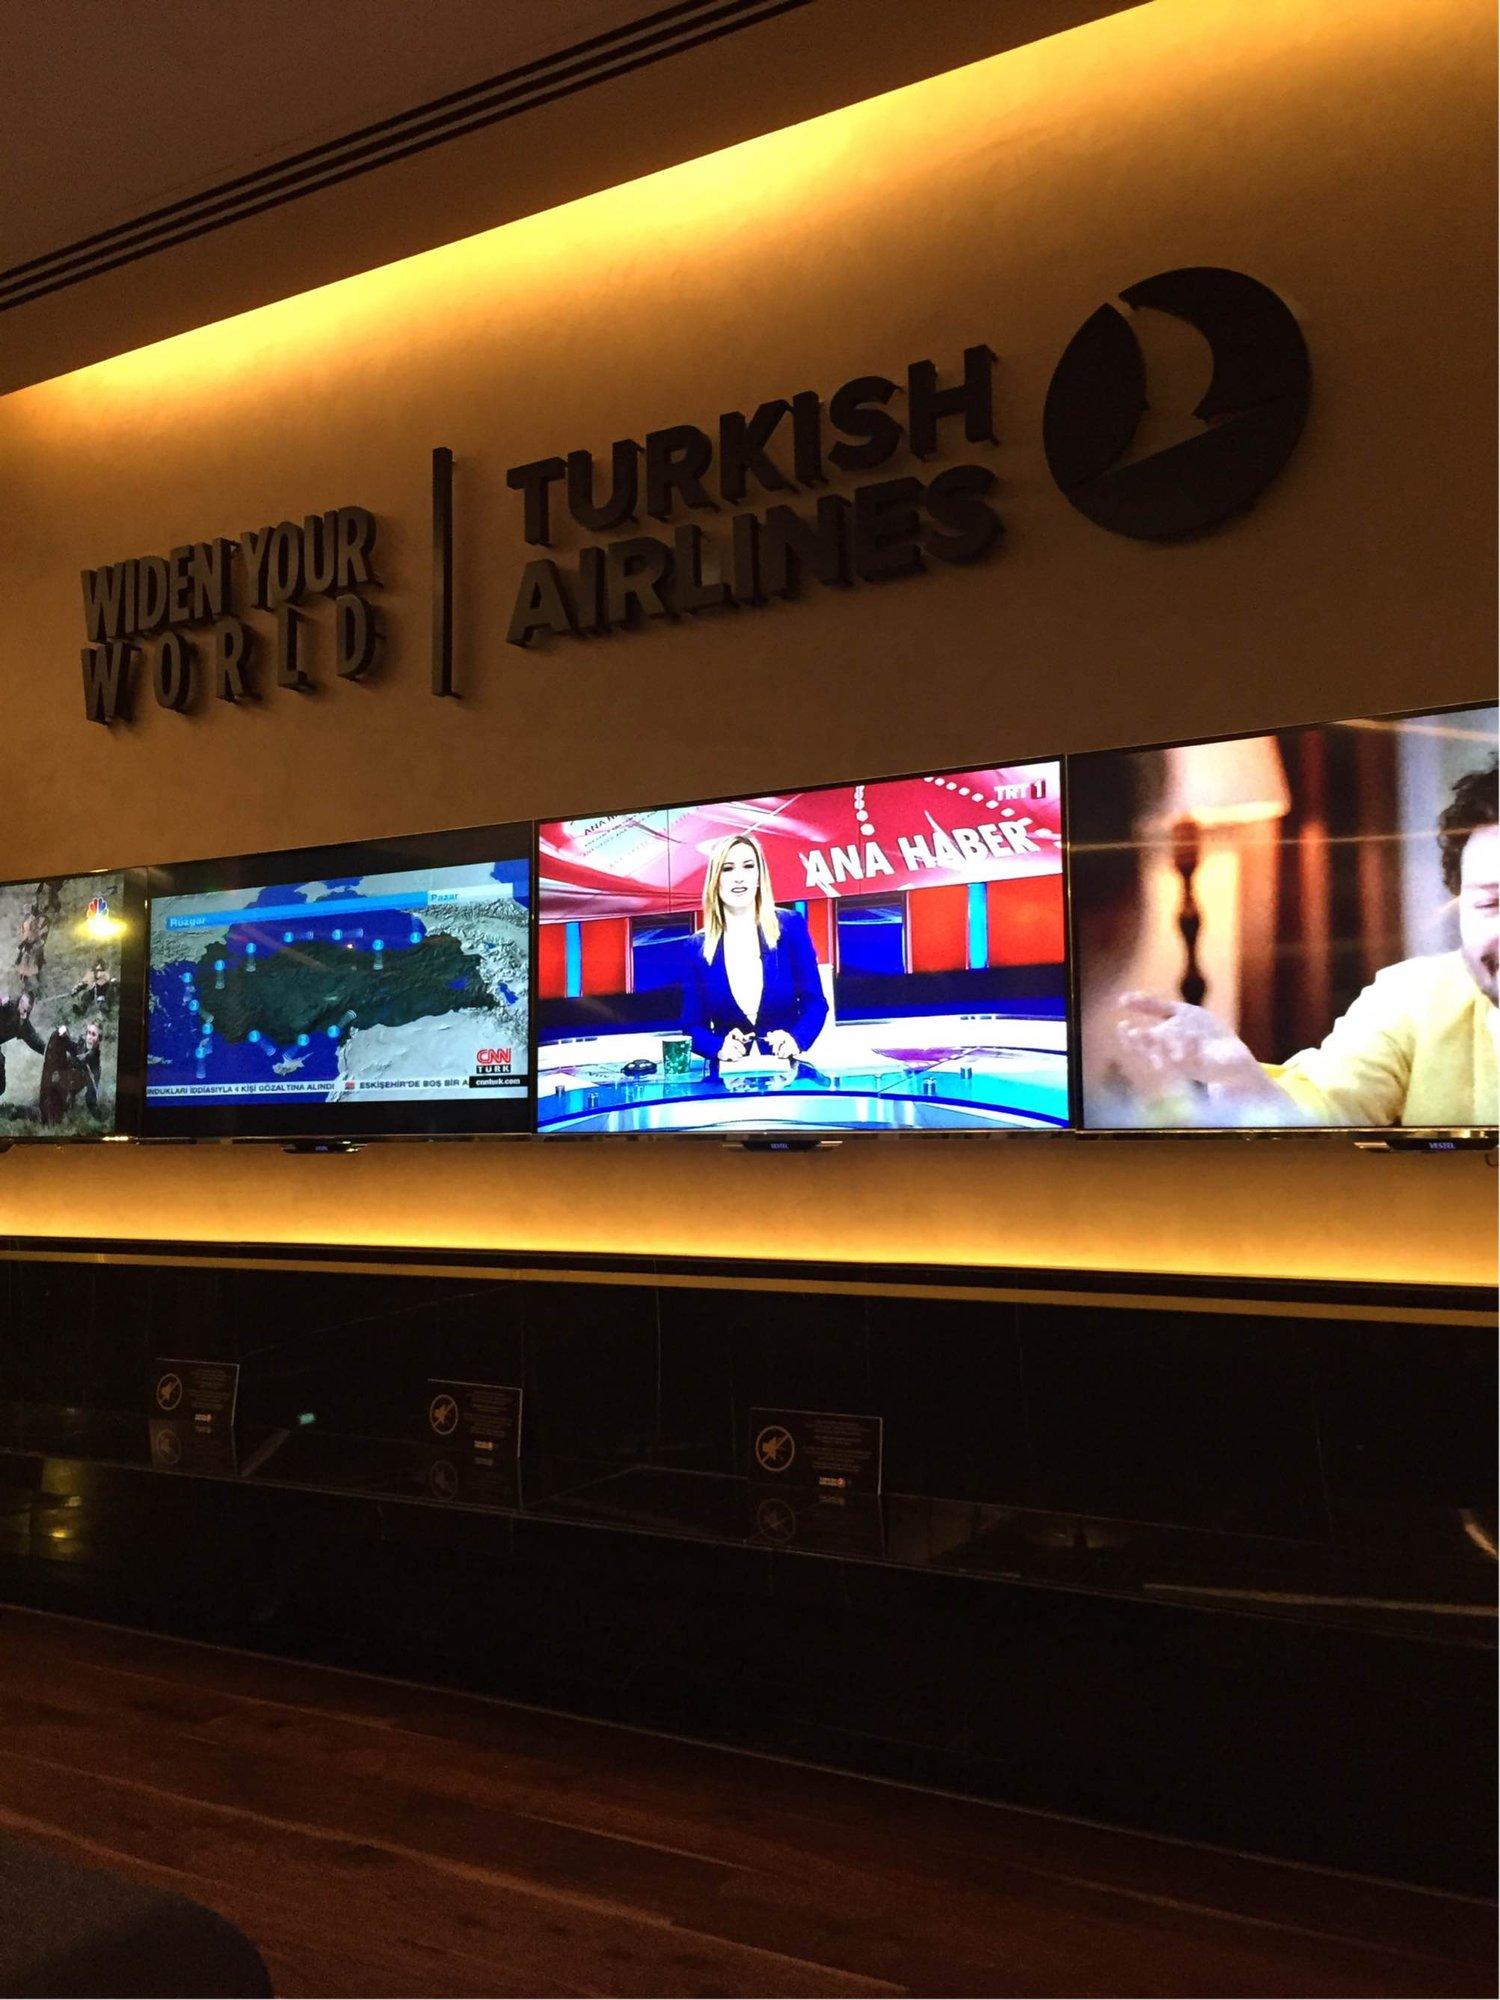 Turkish Airlines CIP Lounge (Domestic Business Lounge) image 1 of 2